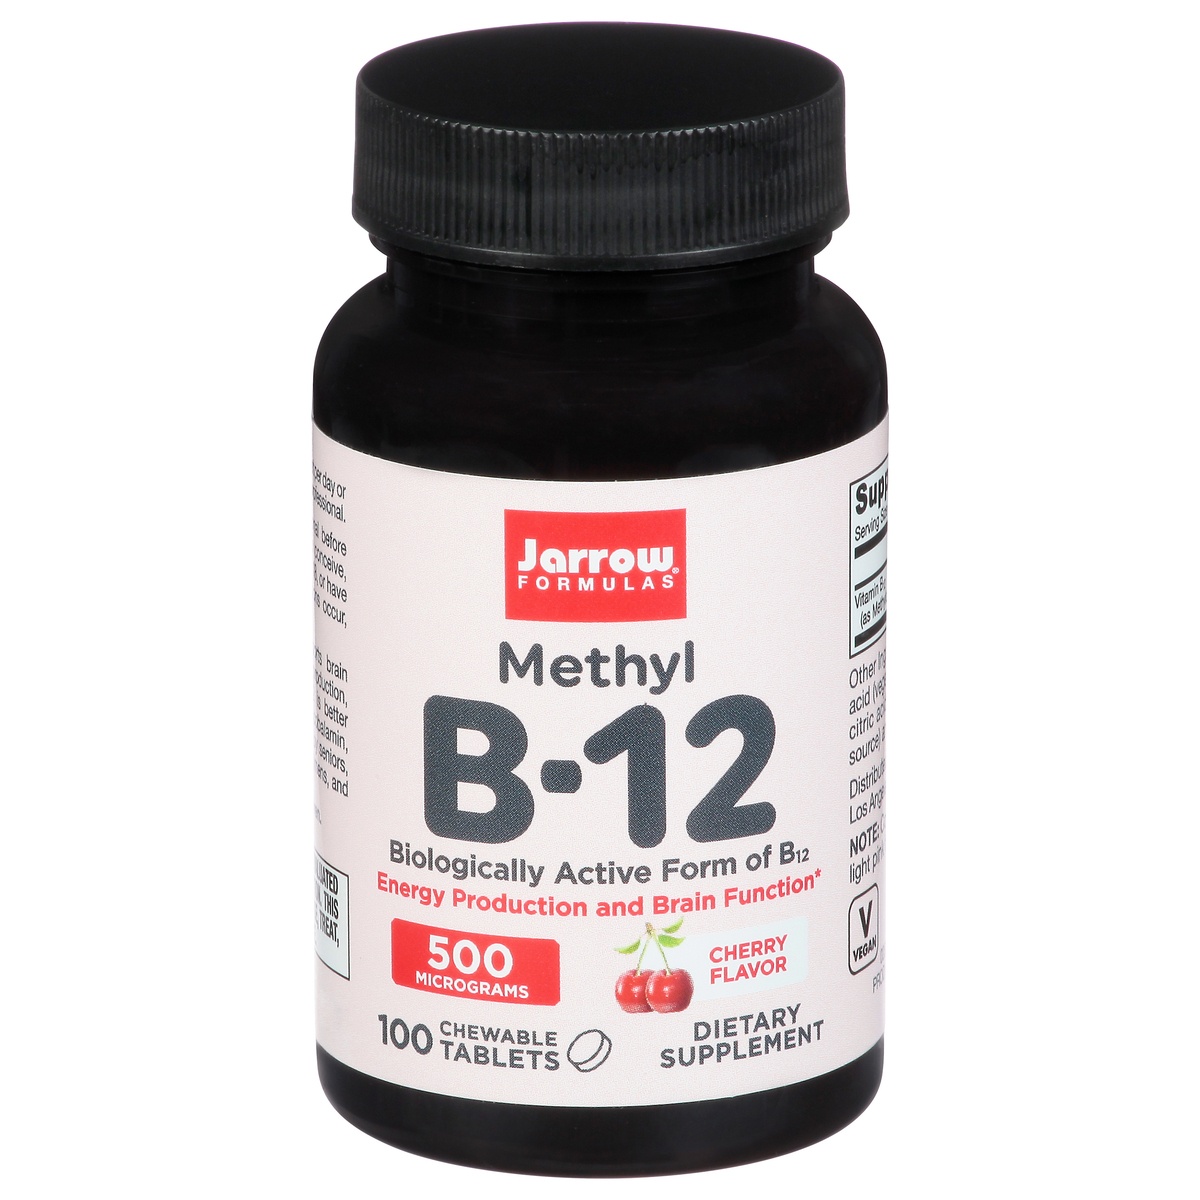 slide 1 of 1, Jarrow Formulas Methyl B-12 - Dietary Supplement - 100 Chewable Tablets, Cherry Flavored Supplement - Bioactive Vitamin B12 - Supports Cellular Energy and Cardiovascular Support Non-GMO & Gluten Free (PACKAGING MAY VARY), 100 ct